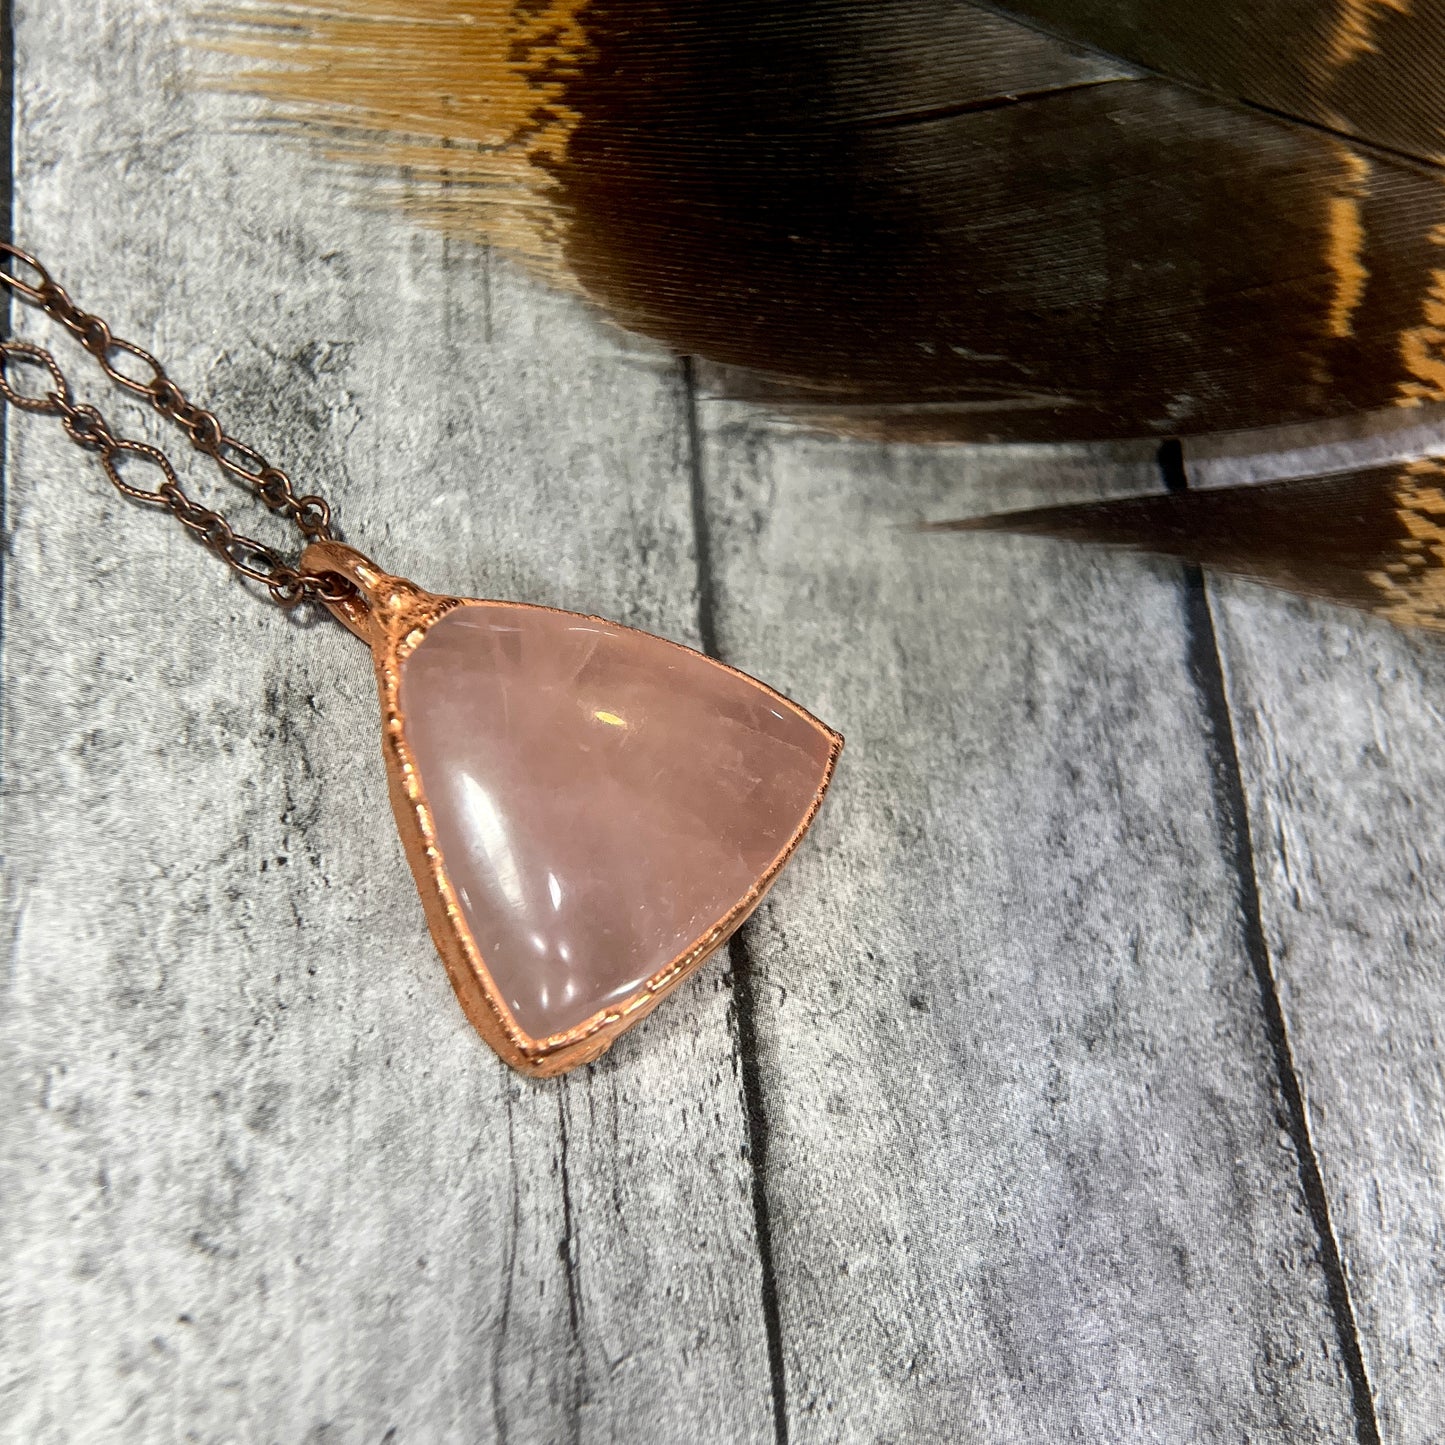 smooth rose quartz crystal pendant on matching copper chain necklace.